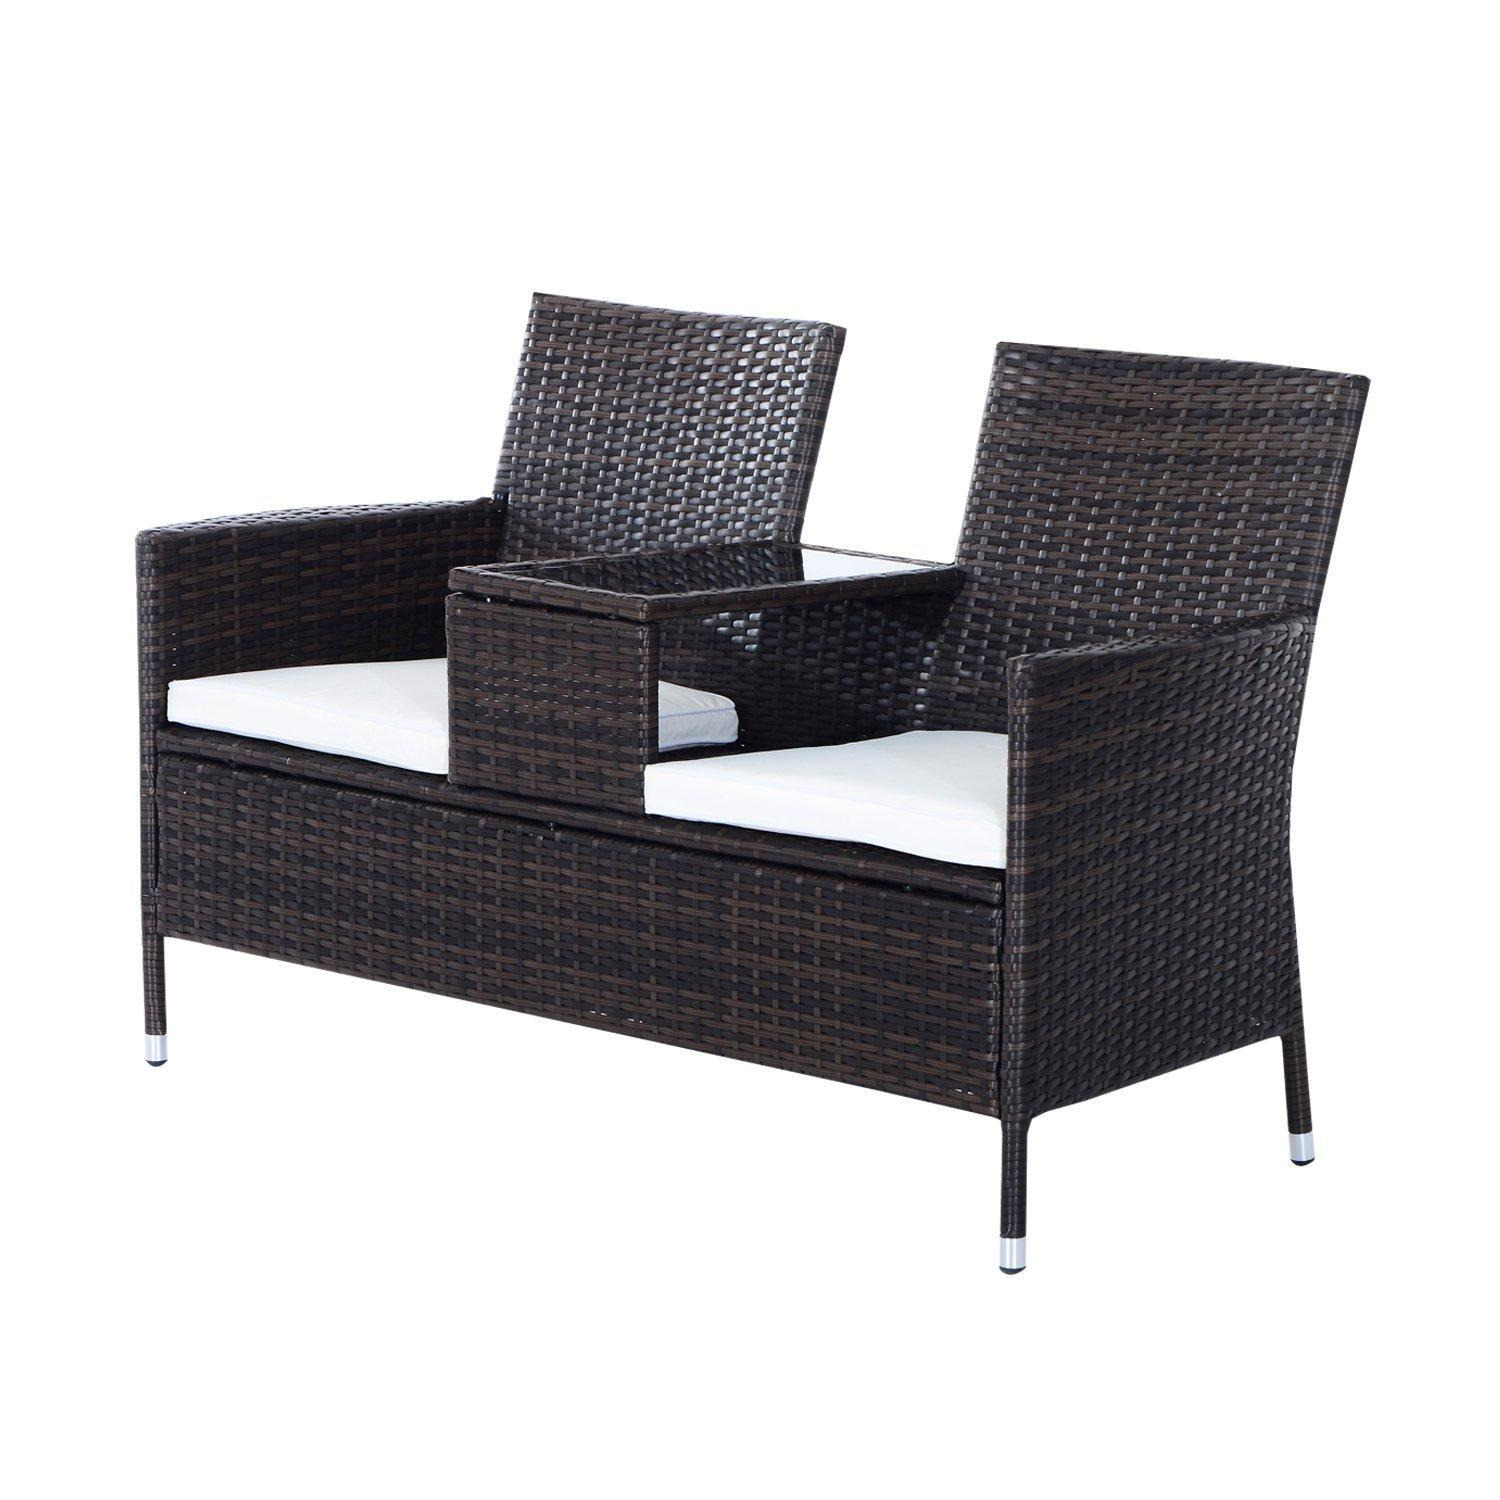 2 Seater Rattan Chair Garden Furniture Wicker Patio Love Seat with Table - image 1